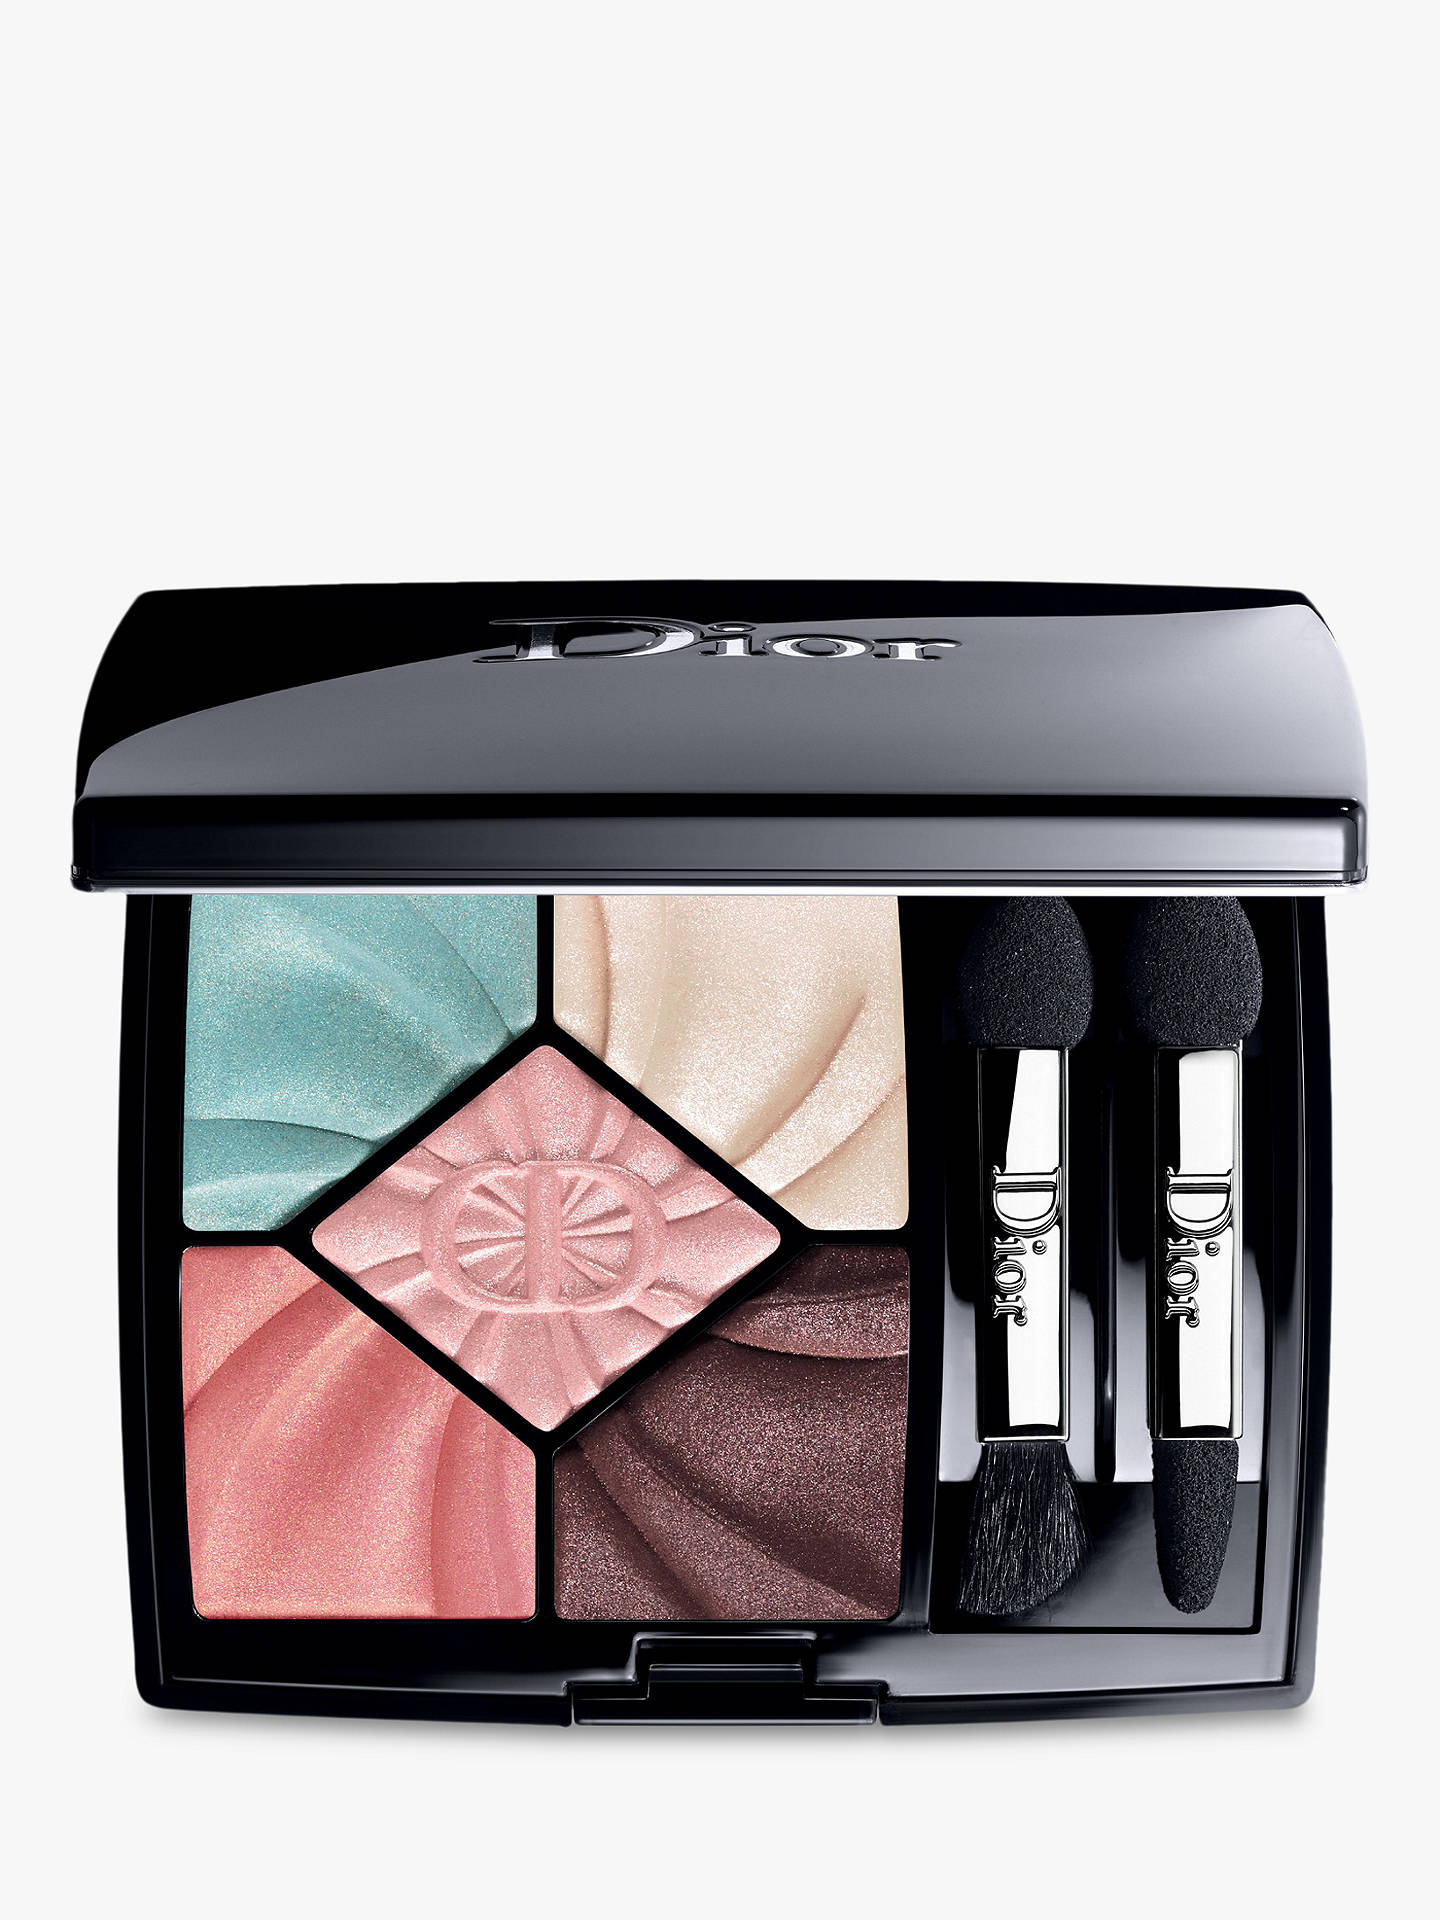 Dior 5 Couleurs Eyeshadow Palette, Limited Edition at John